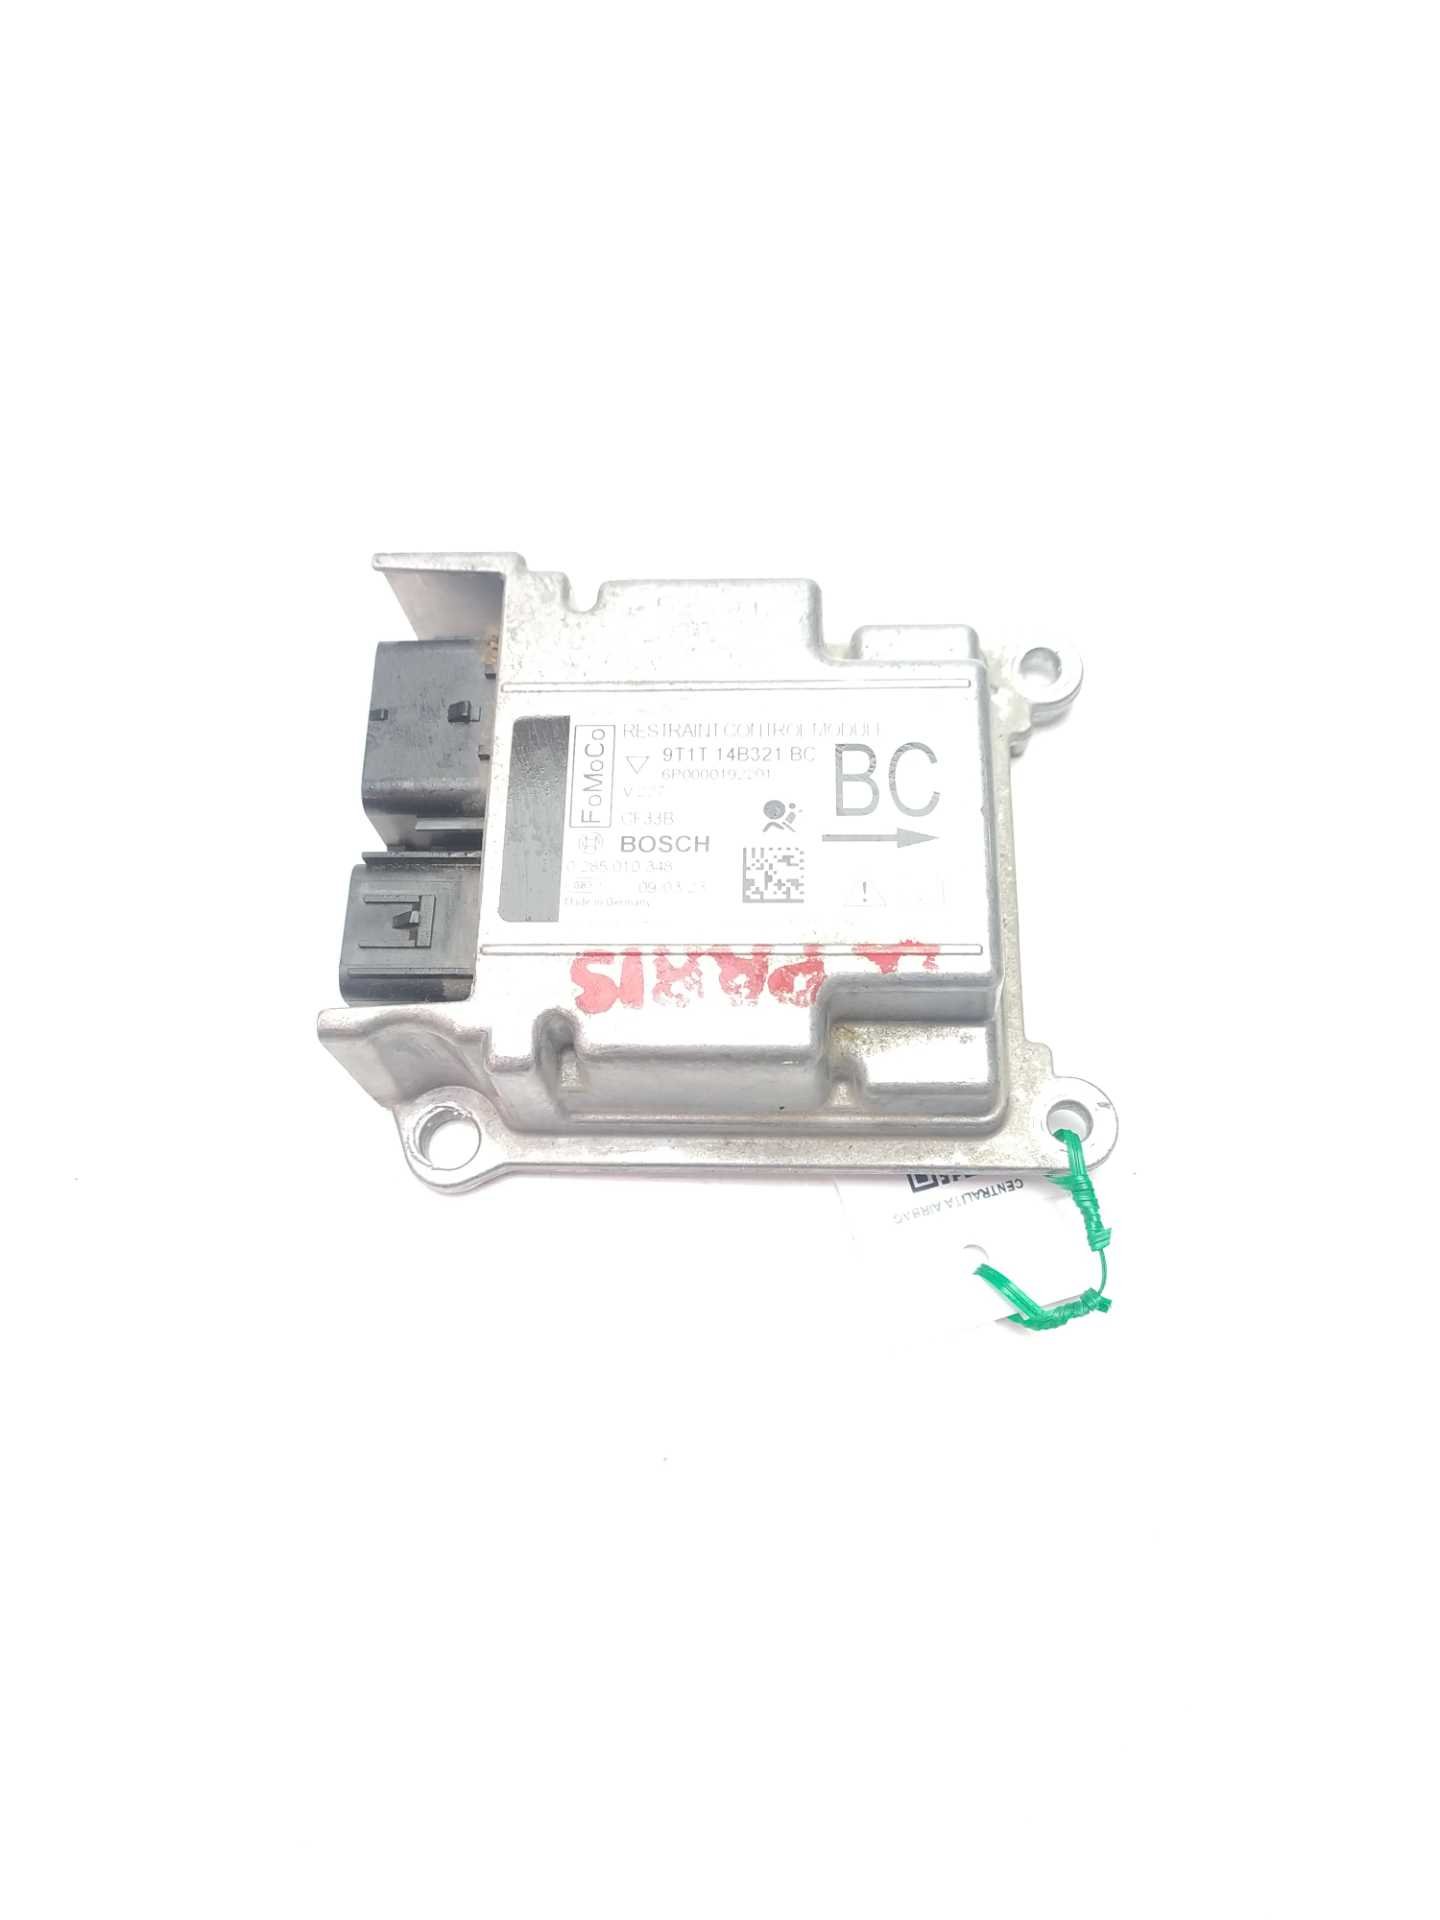 CENTRALITA AIRBAG FORD TOURNEO CONNECT 1.8 TDCi (66 KW / 90 CV) (06.2002 - 12.2013)